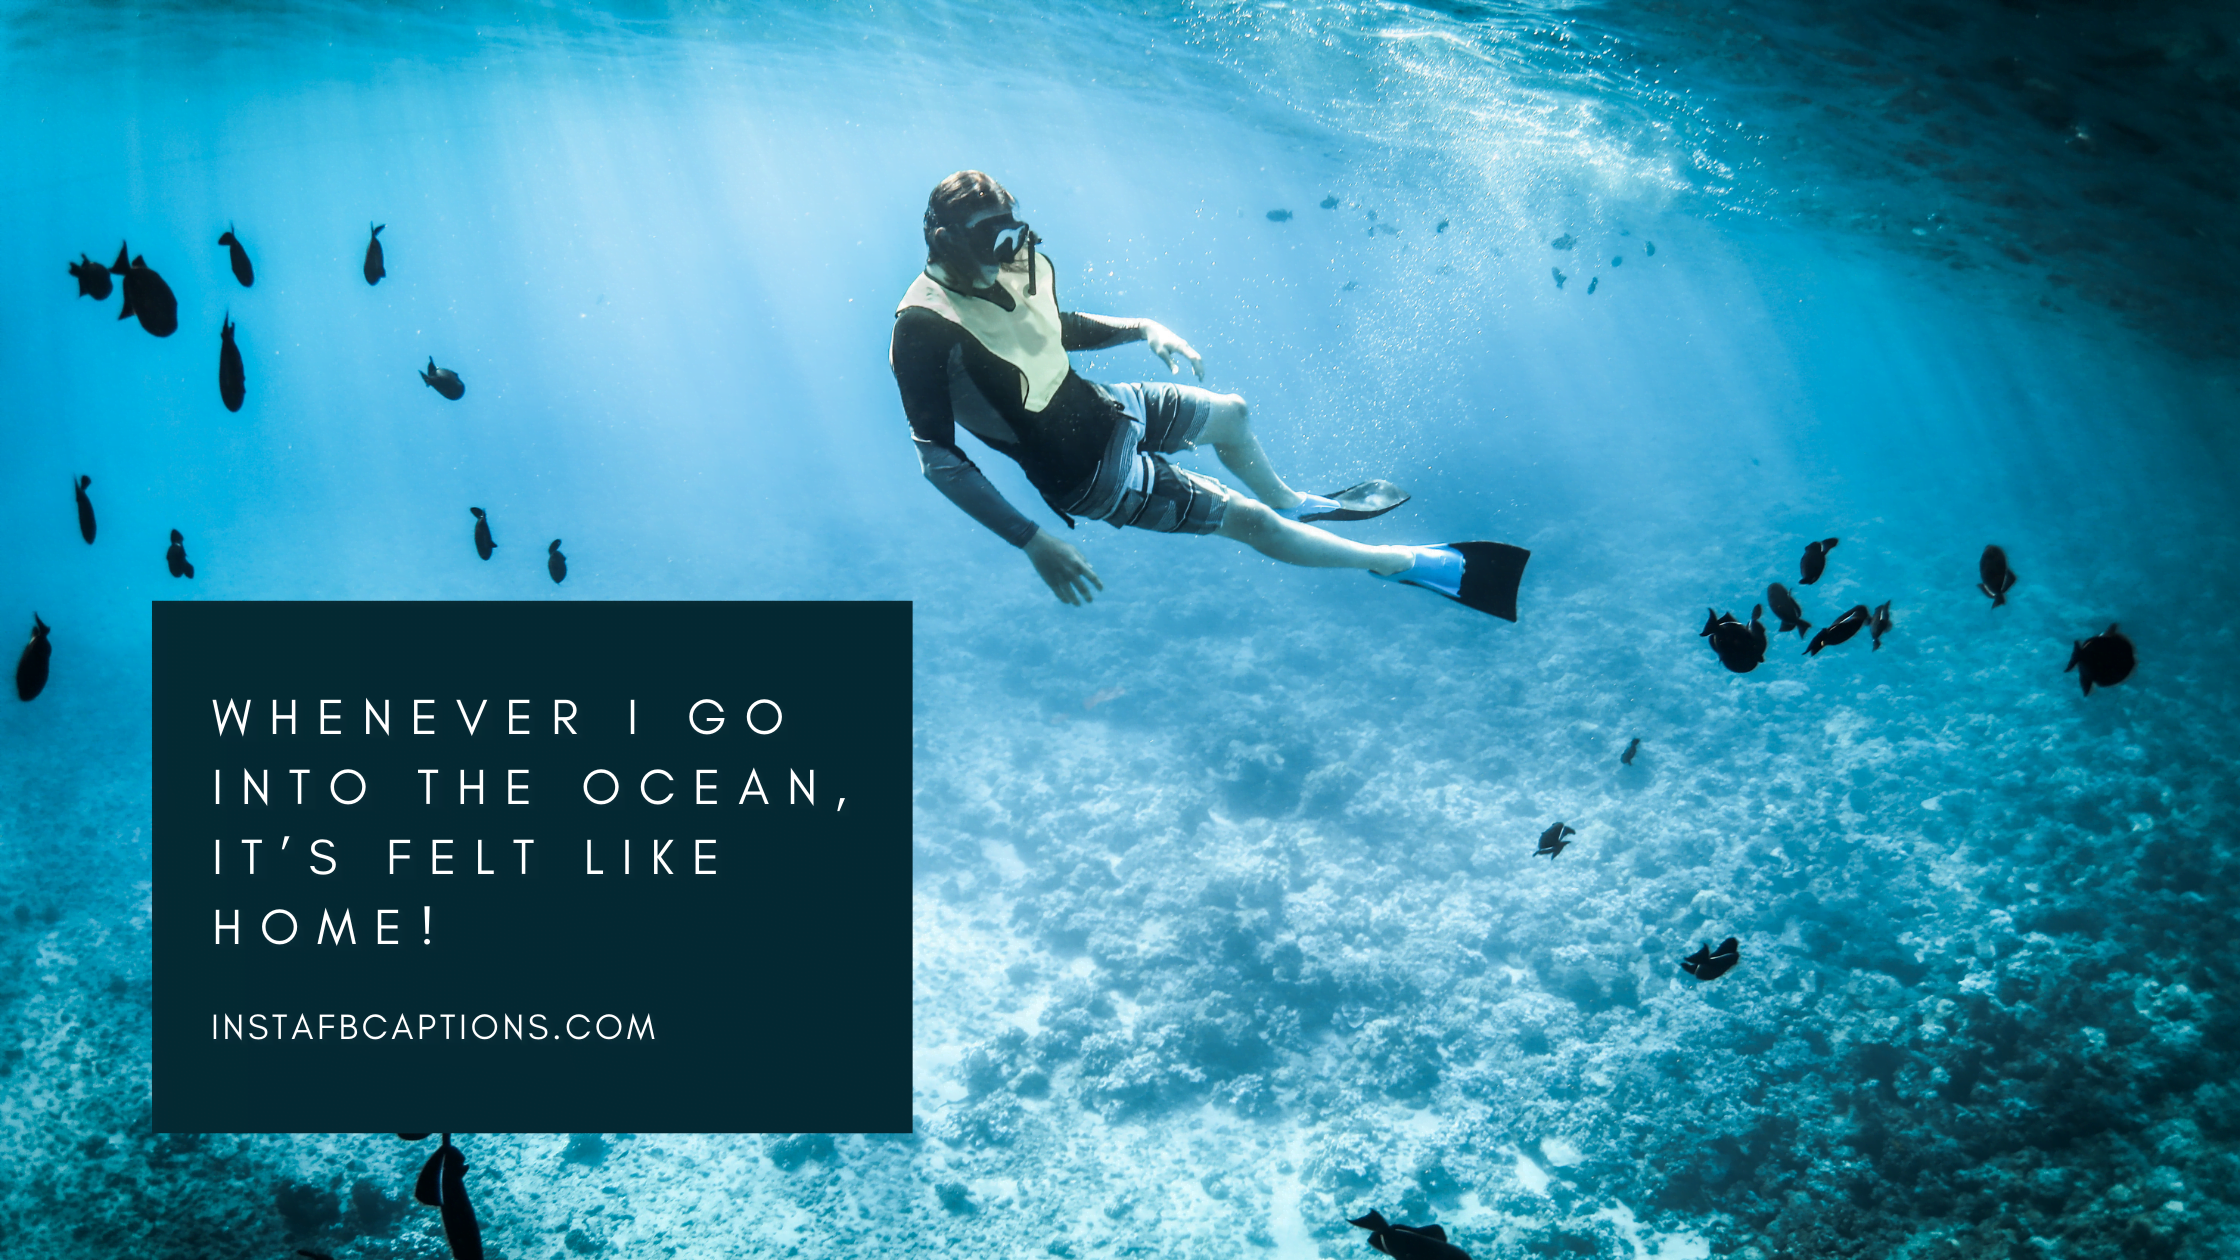 Whenever I go into the ocean, it’s felt like HOME!  - Key West Diving Captions  - 98 Key West Quotes, Captions, Puns, Phrases for 2023